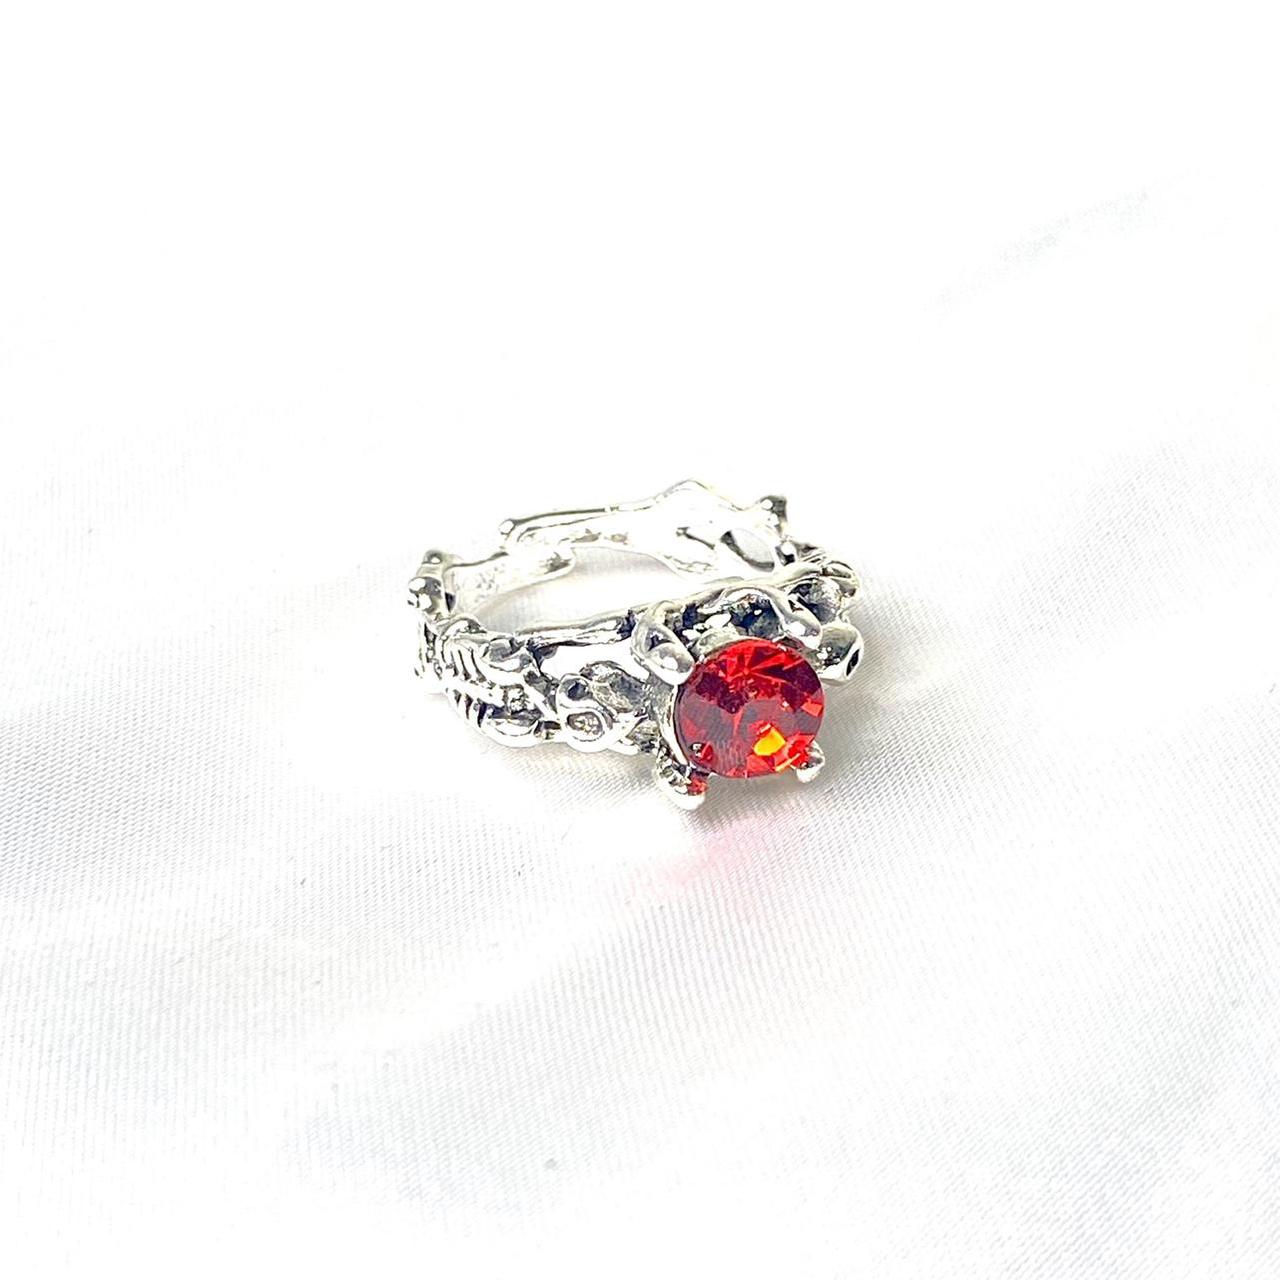 Women's Silver and Red Jewellery